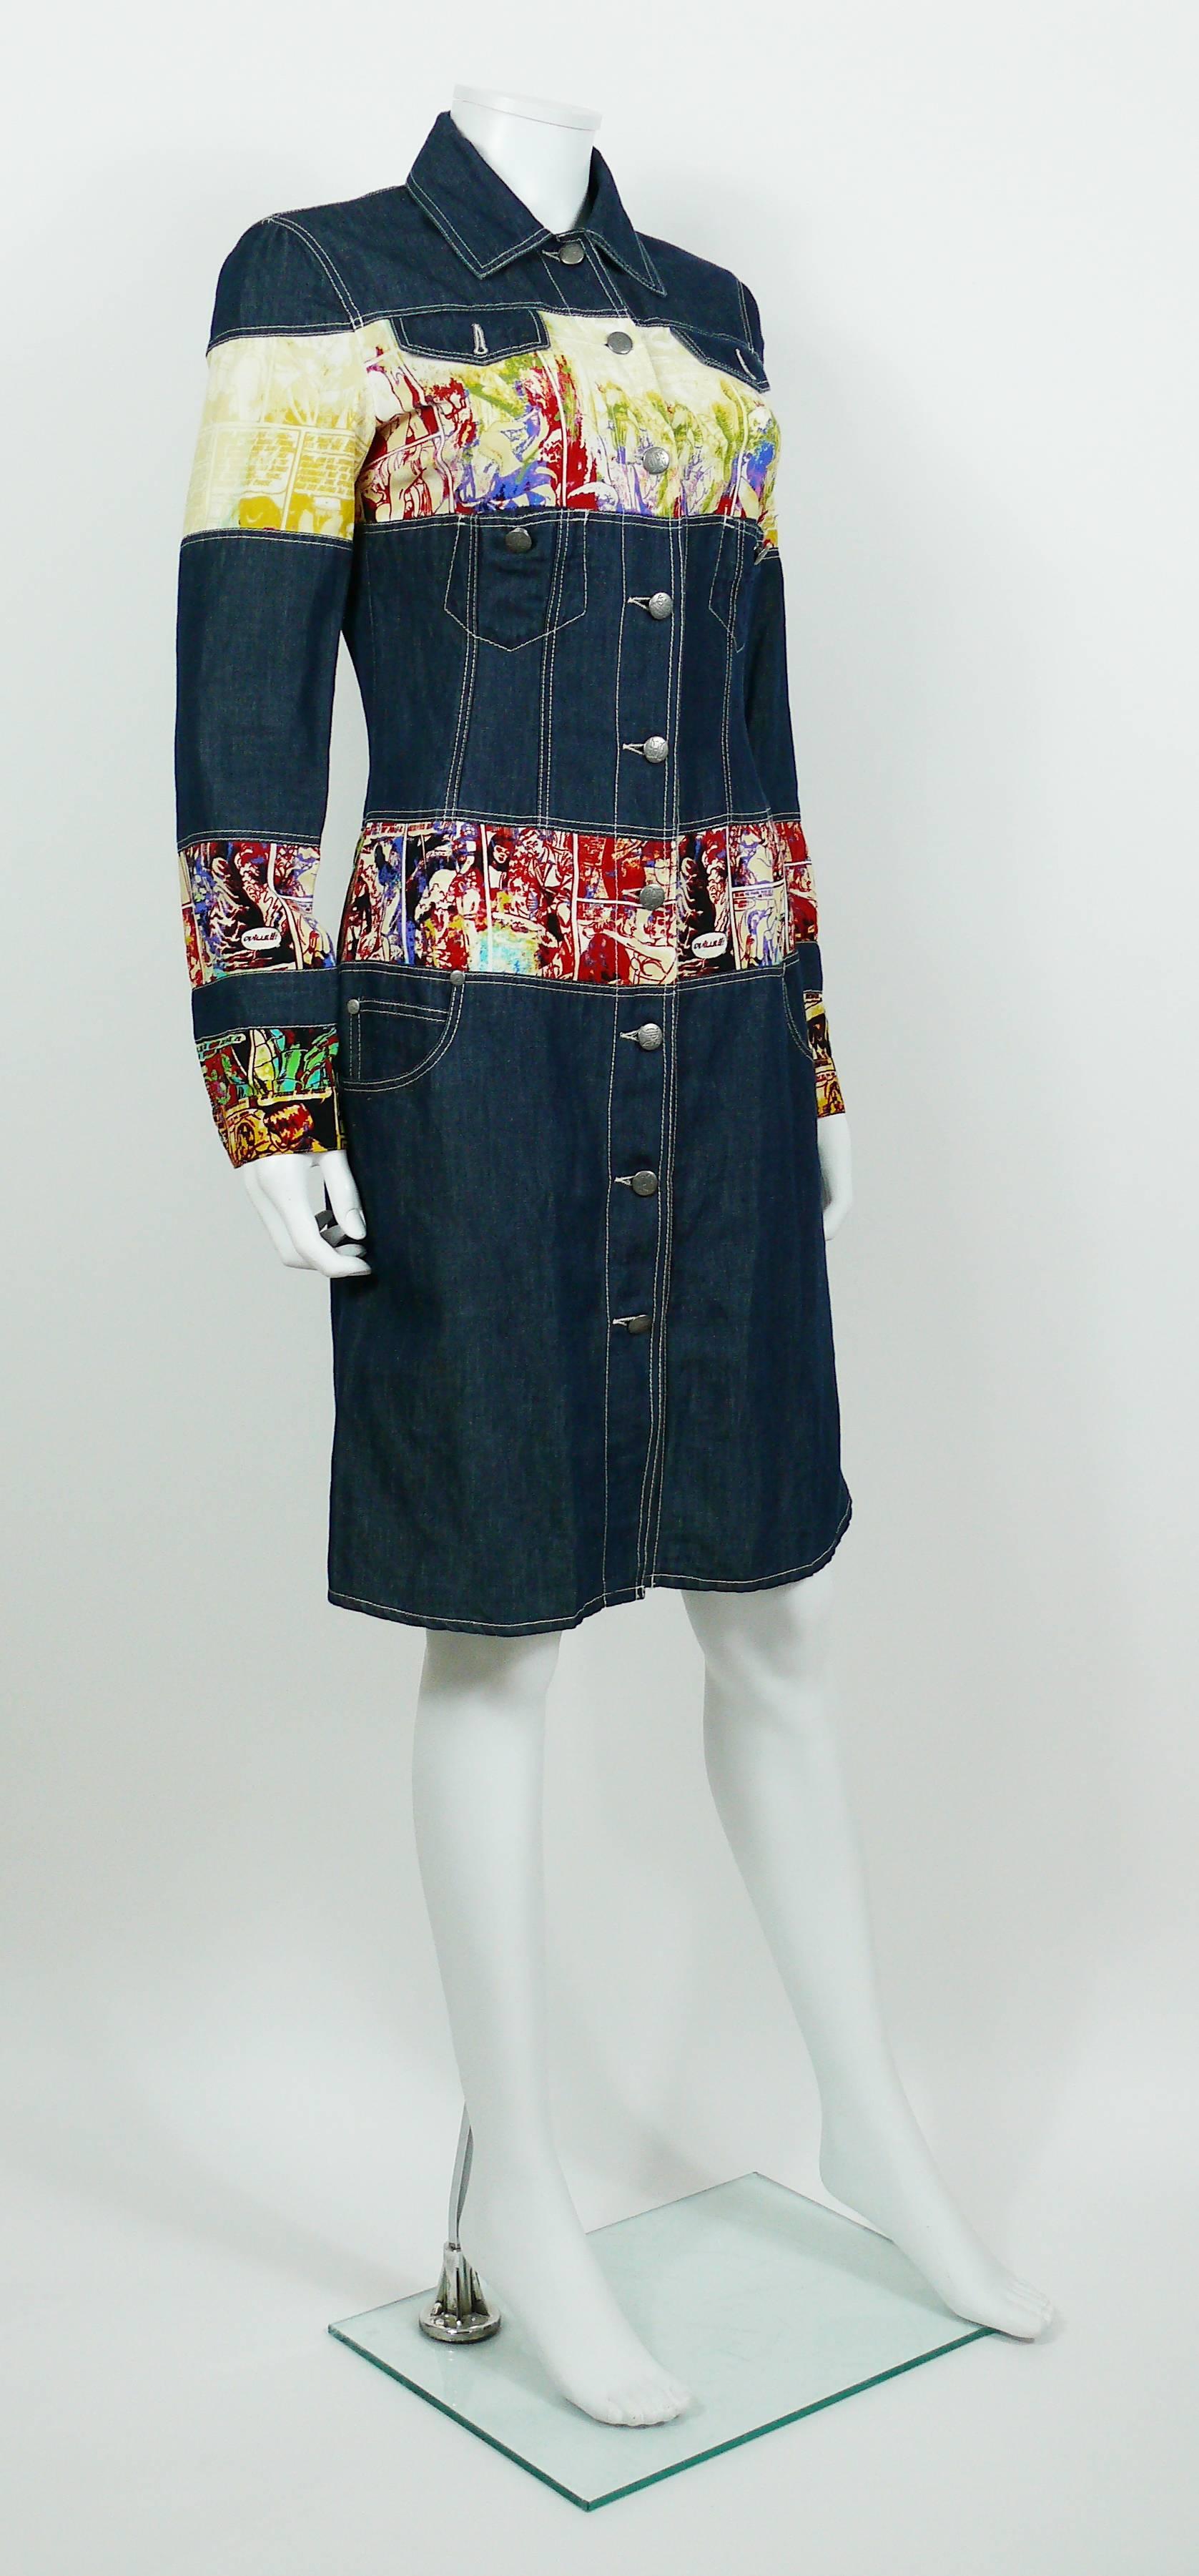 JEAN PAUL GAULTIER vintage comics print denim coat dress.

Signature JPG button and rivets.

Label reads JPG JEAN'S Paris.
Made in Italy.

Missing size tag.
Please refer to measurements.

Composition tag reads : 40% Viscose / 35% Coton / 25%